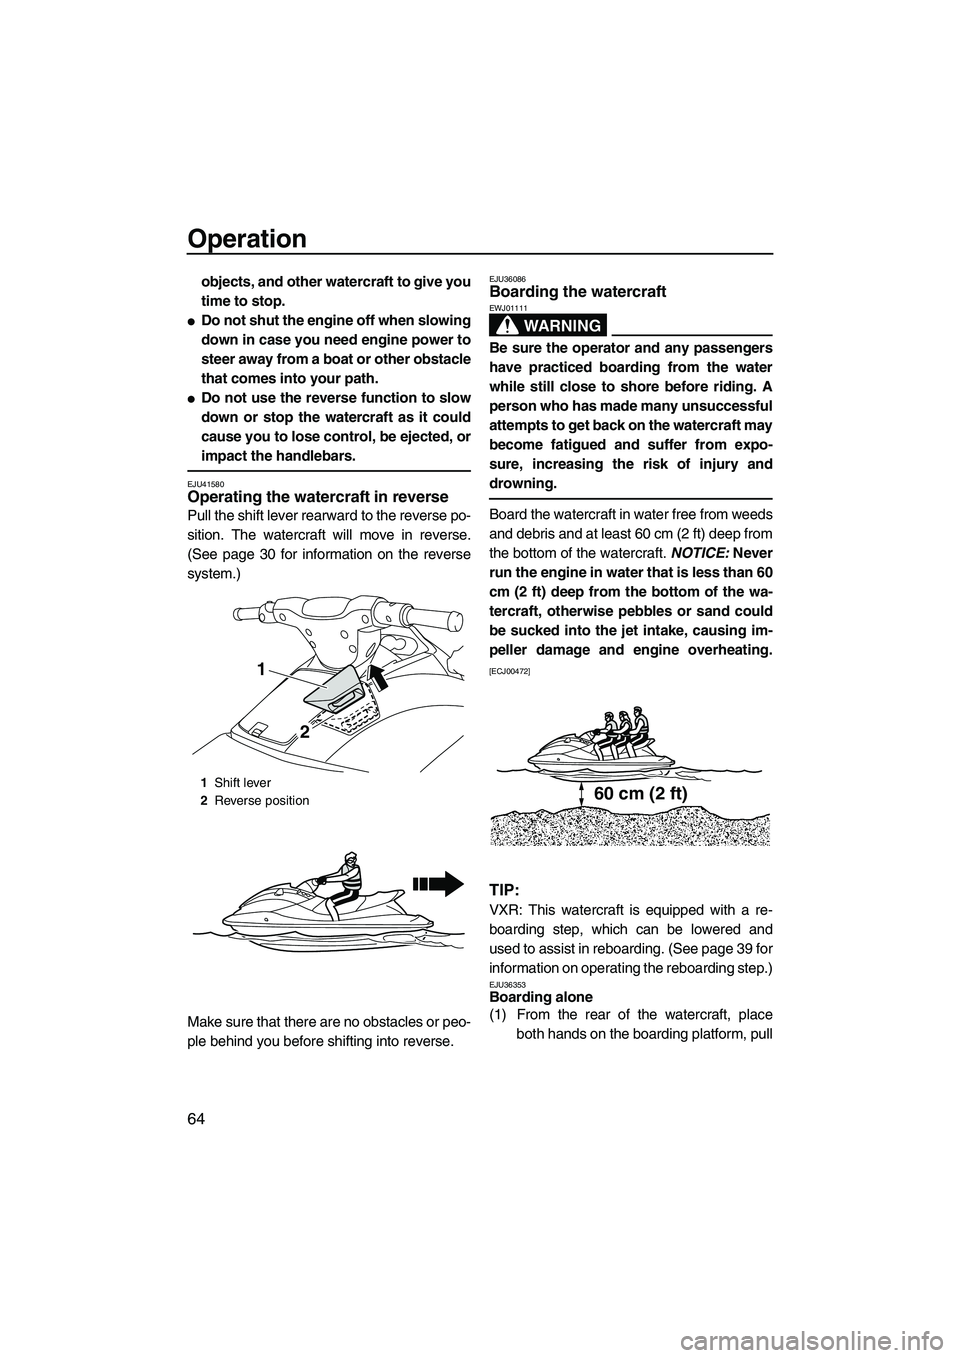 YAMAHA VXS 2013  Owners Manual Operation
64
objects, and other watercraft to give you
time to stop.
●Do not shut the engine off when slowing
down in case you need engine power to
steer away from a boat or other obstacle
that come